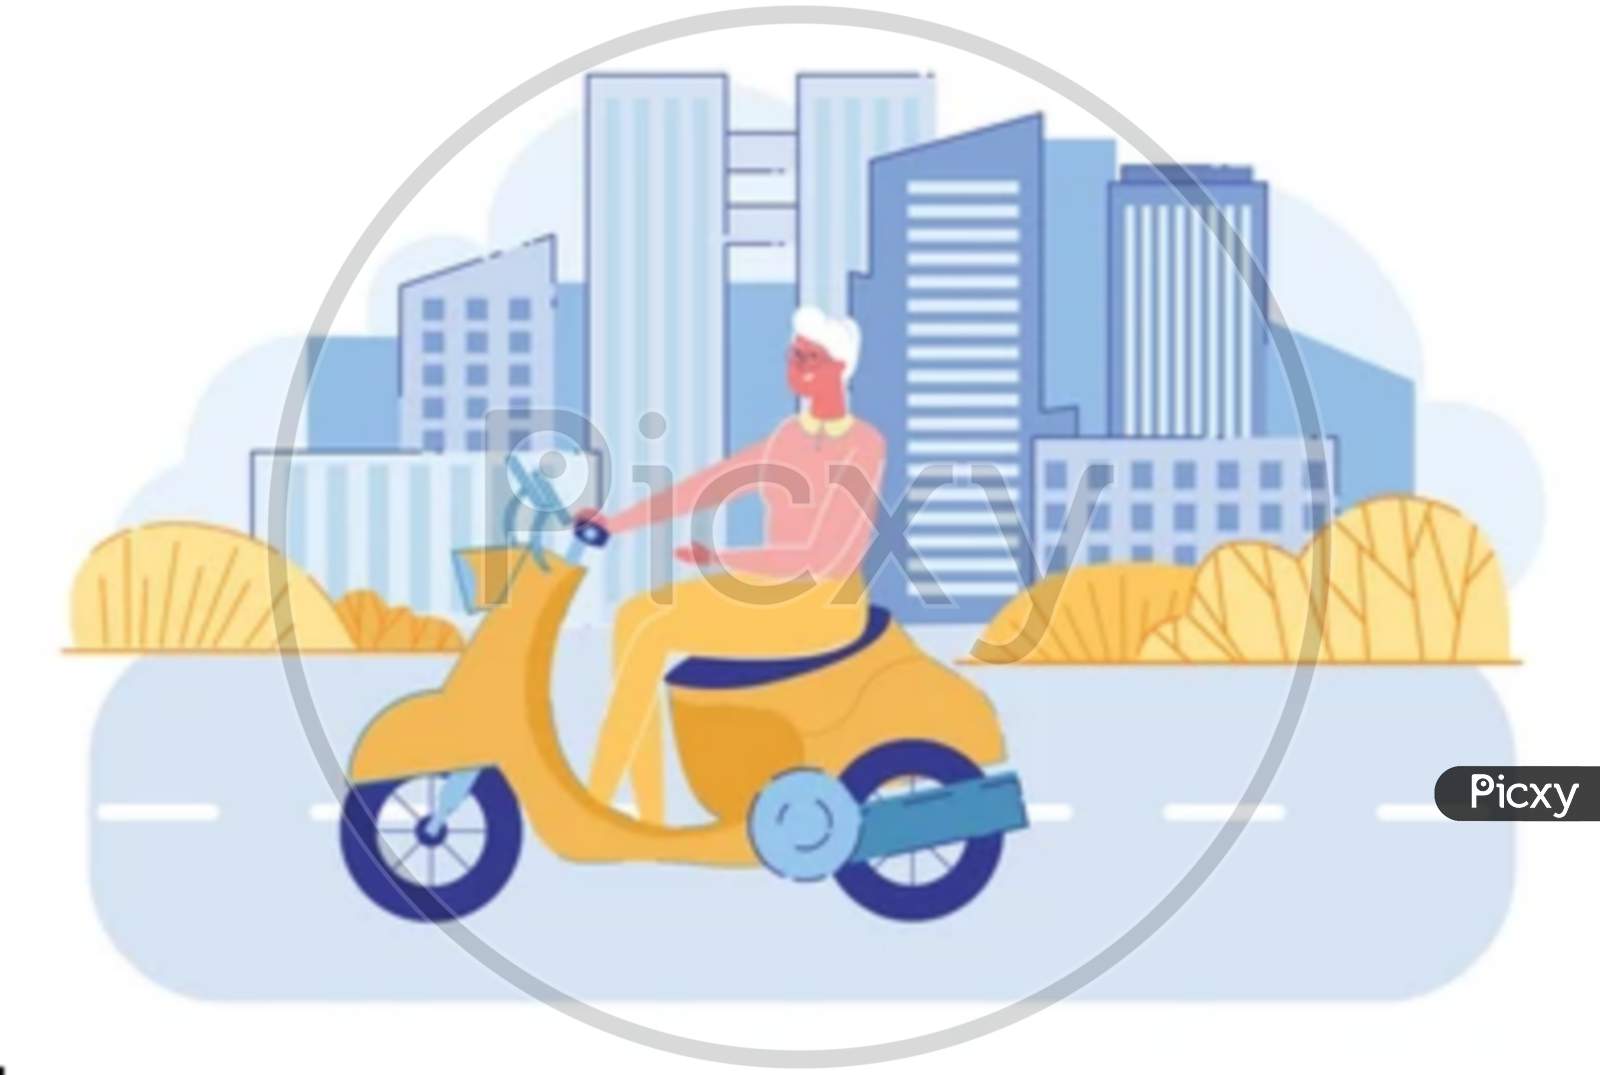 Cheerful Senior Lady Driving Vintage Scooter on Cityscape Background with Skyscrapers. Active Grandma Riding Bike. Retired Pensioner Leisure, Hobby and Lifestyle. Cartoon Flat Vector Illustration